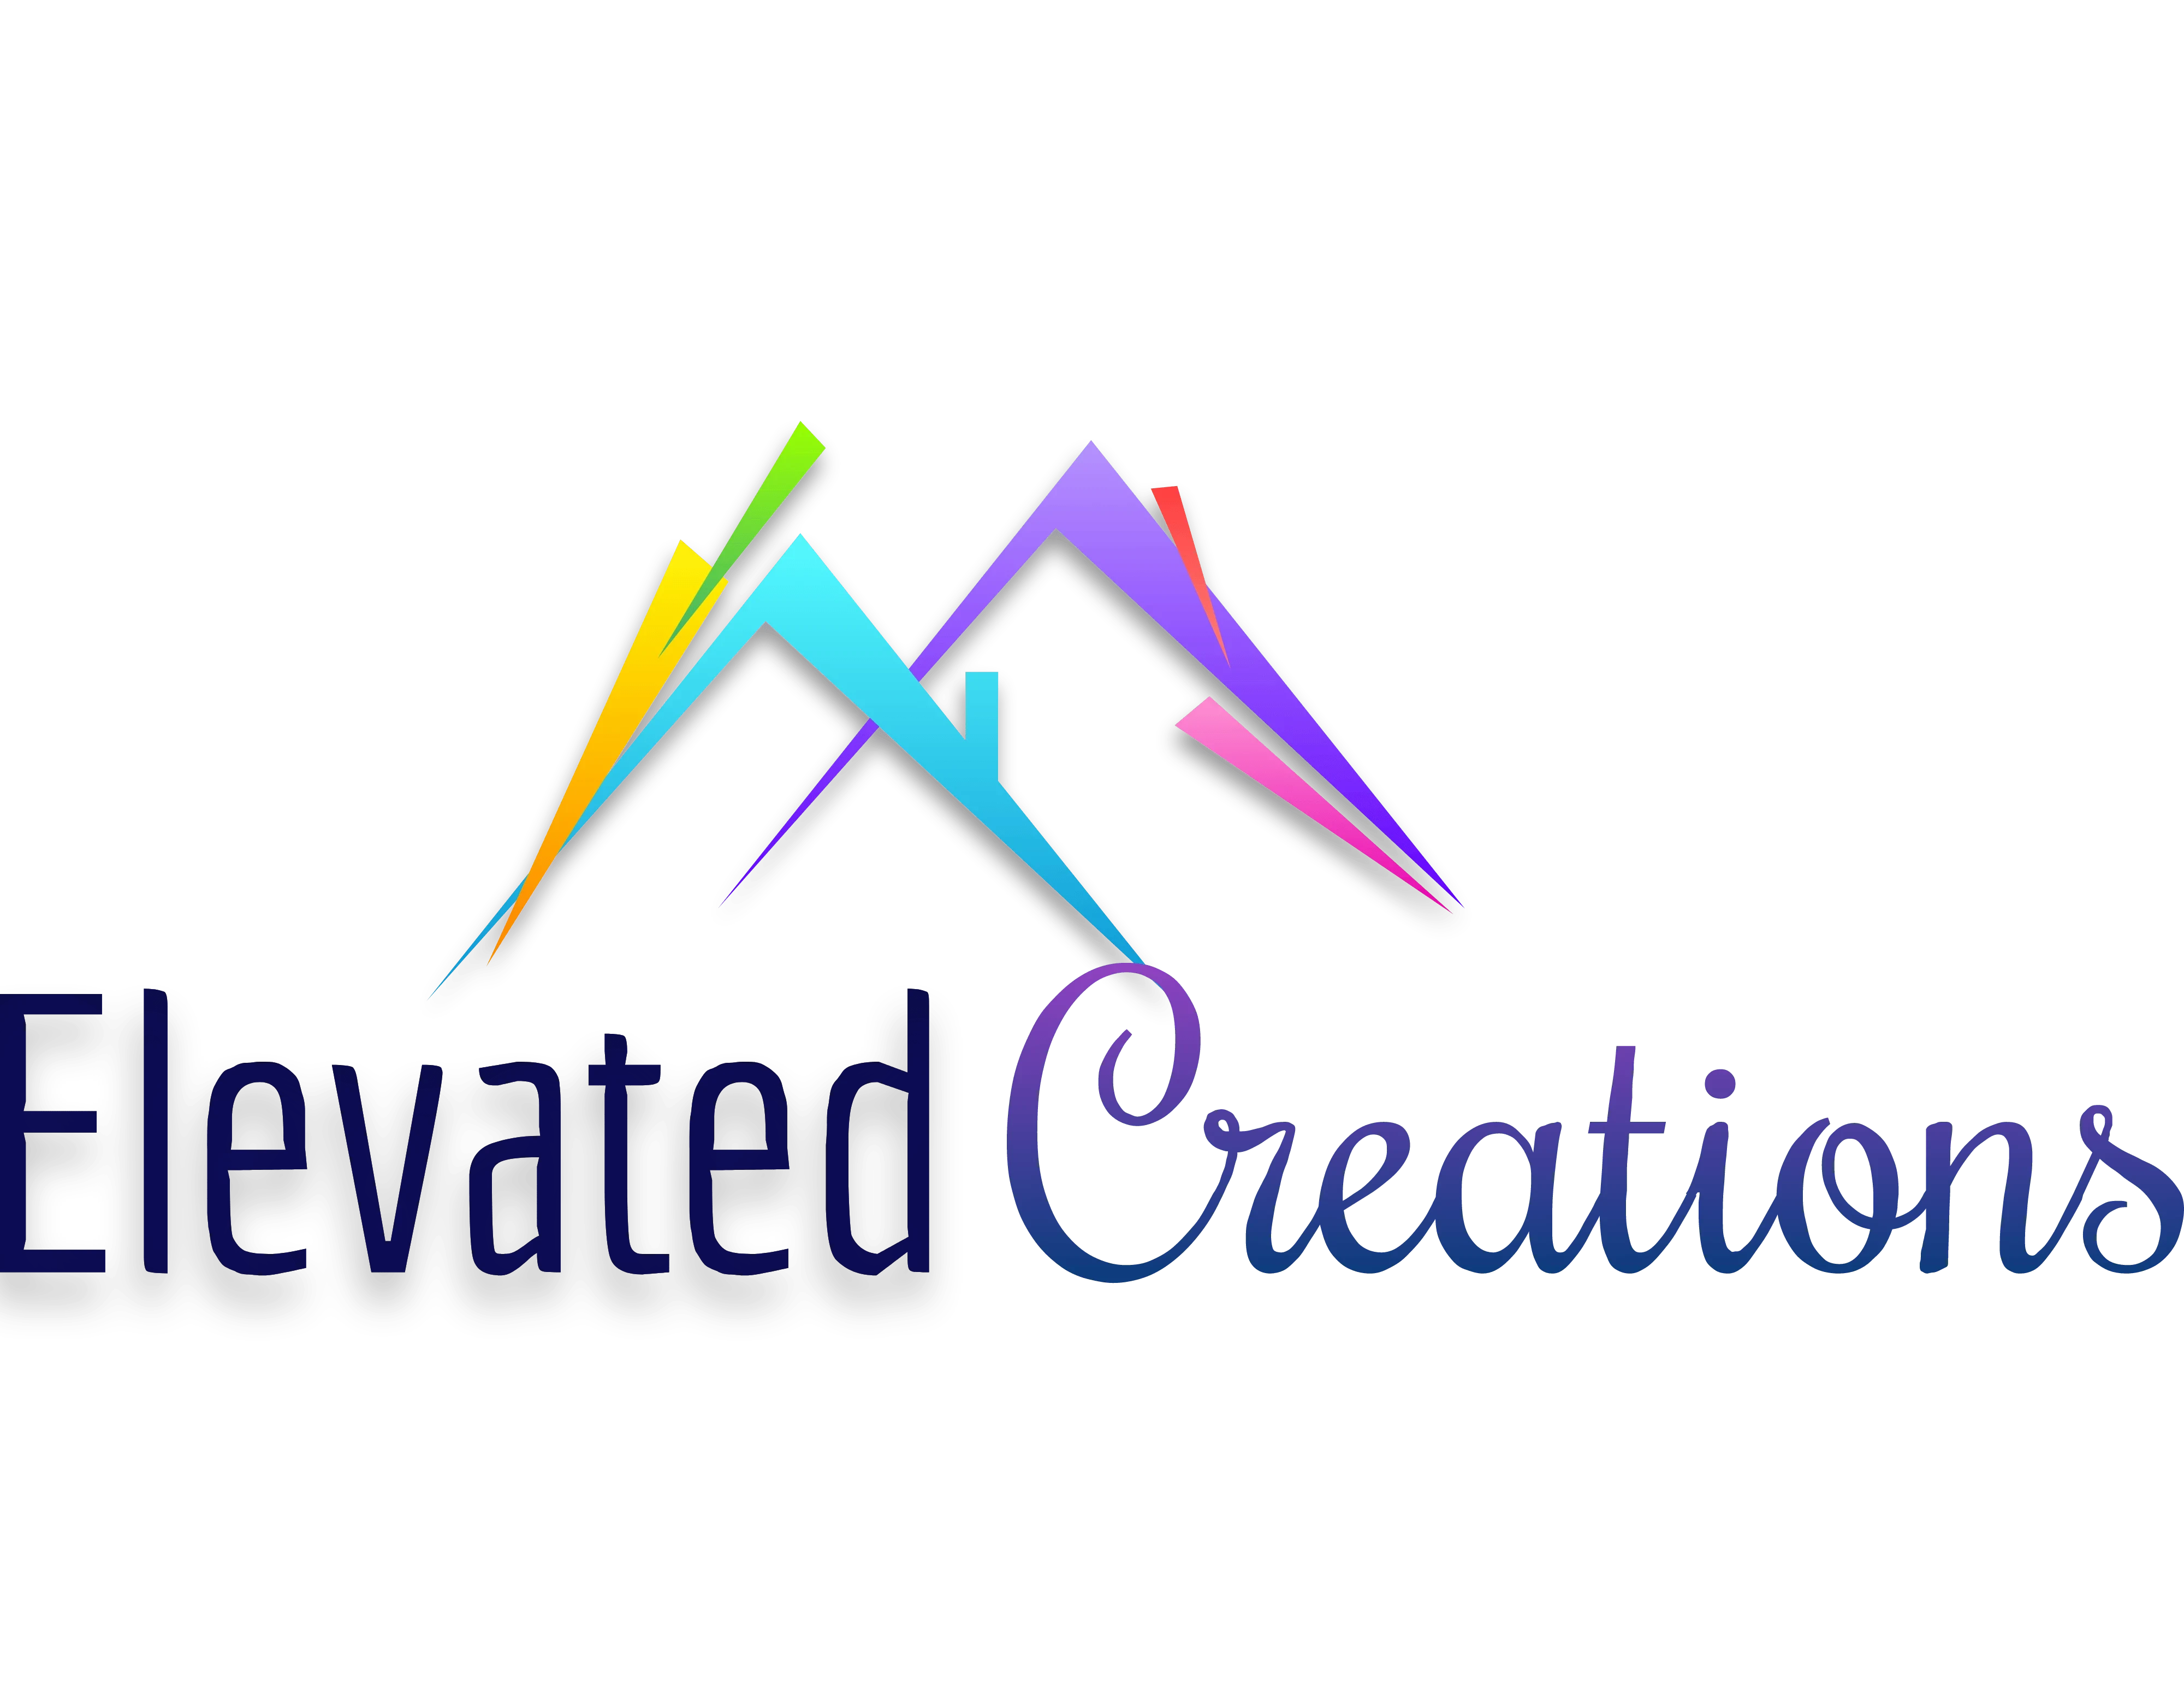 Elevated Creations